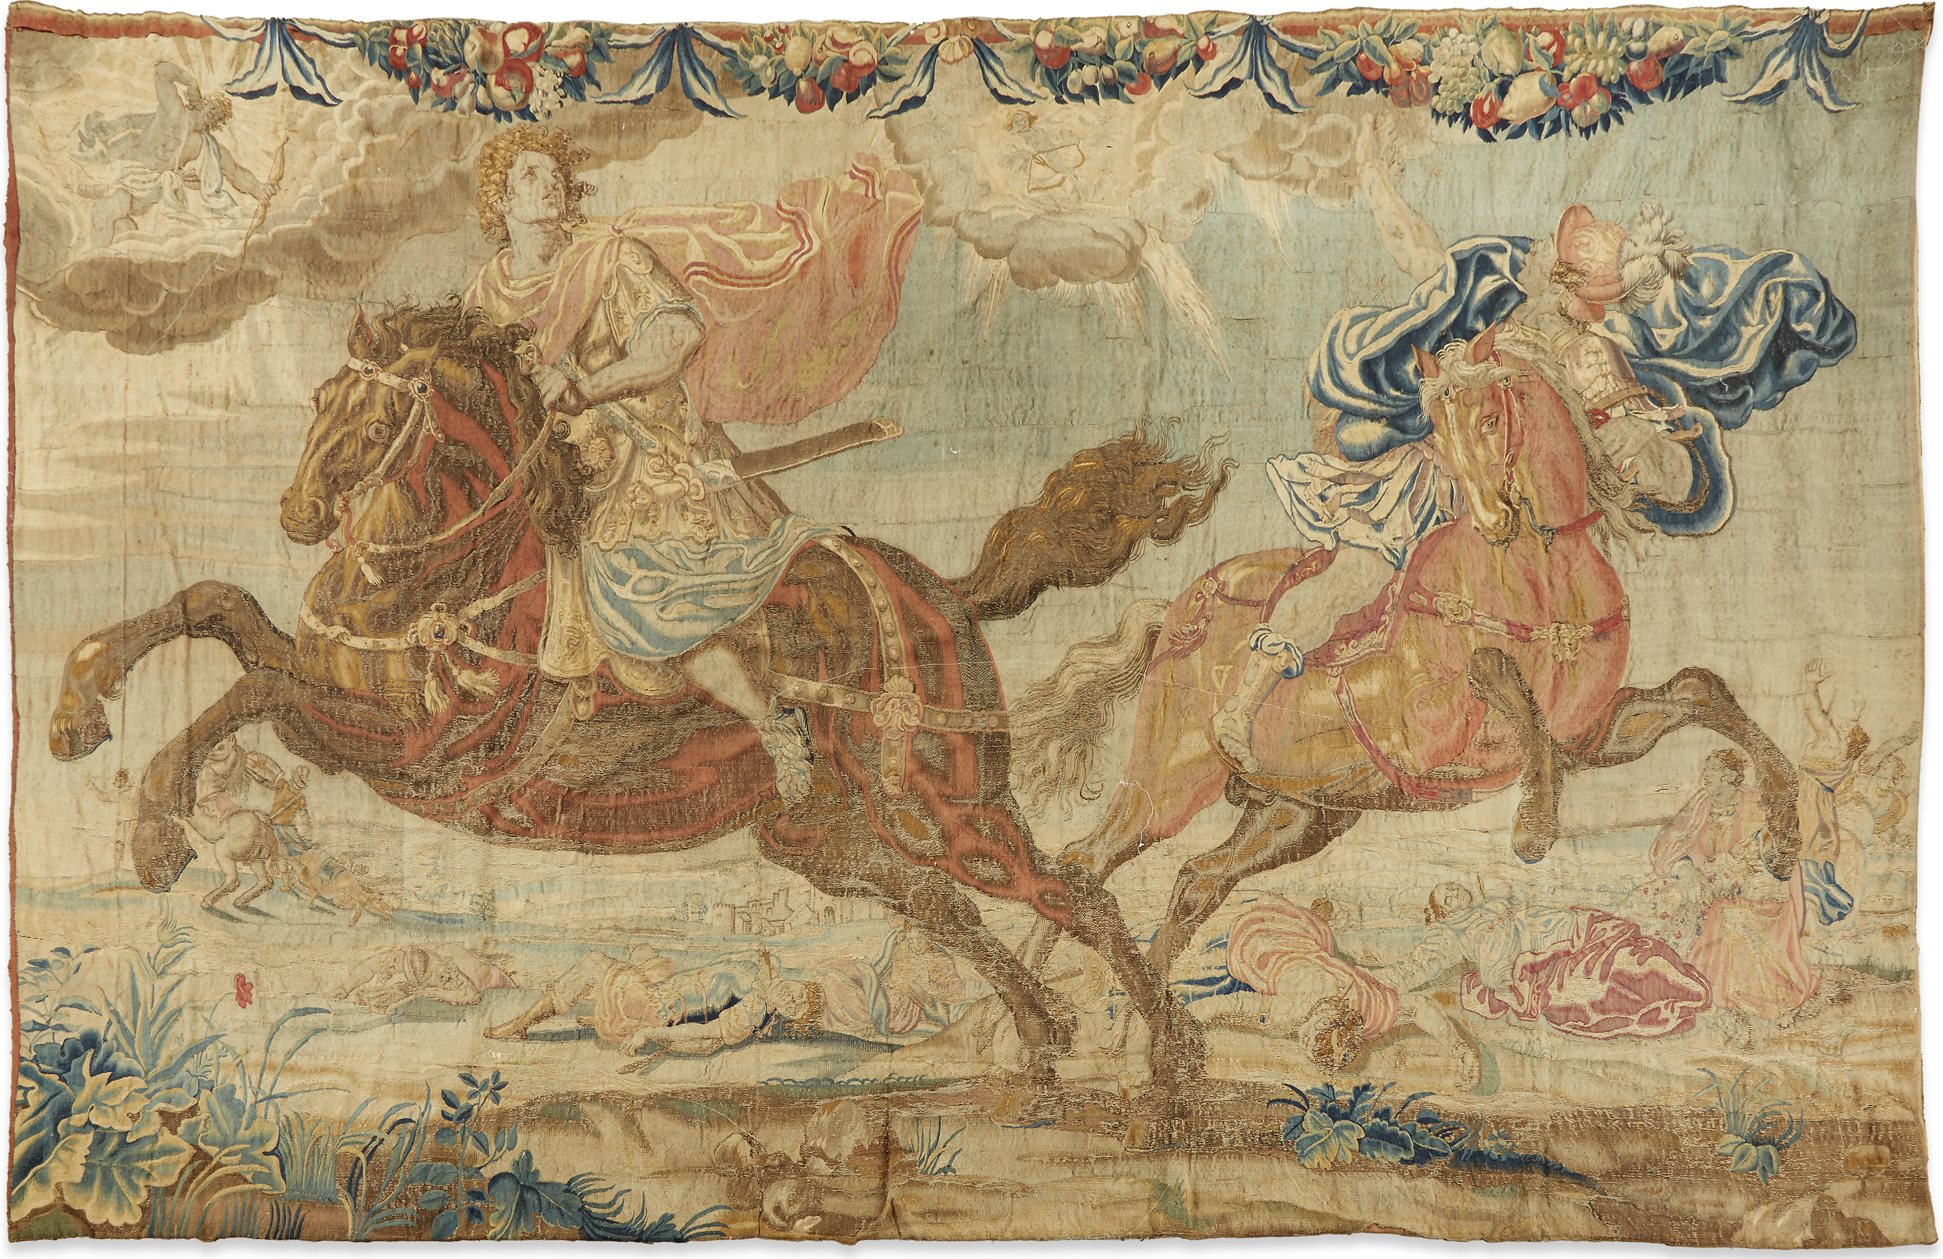 Lot 52: A Mortlake Tapestry from 